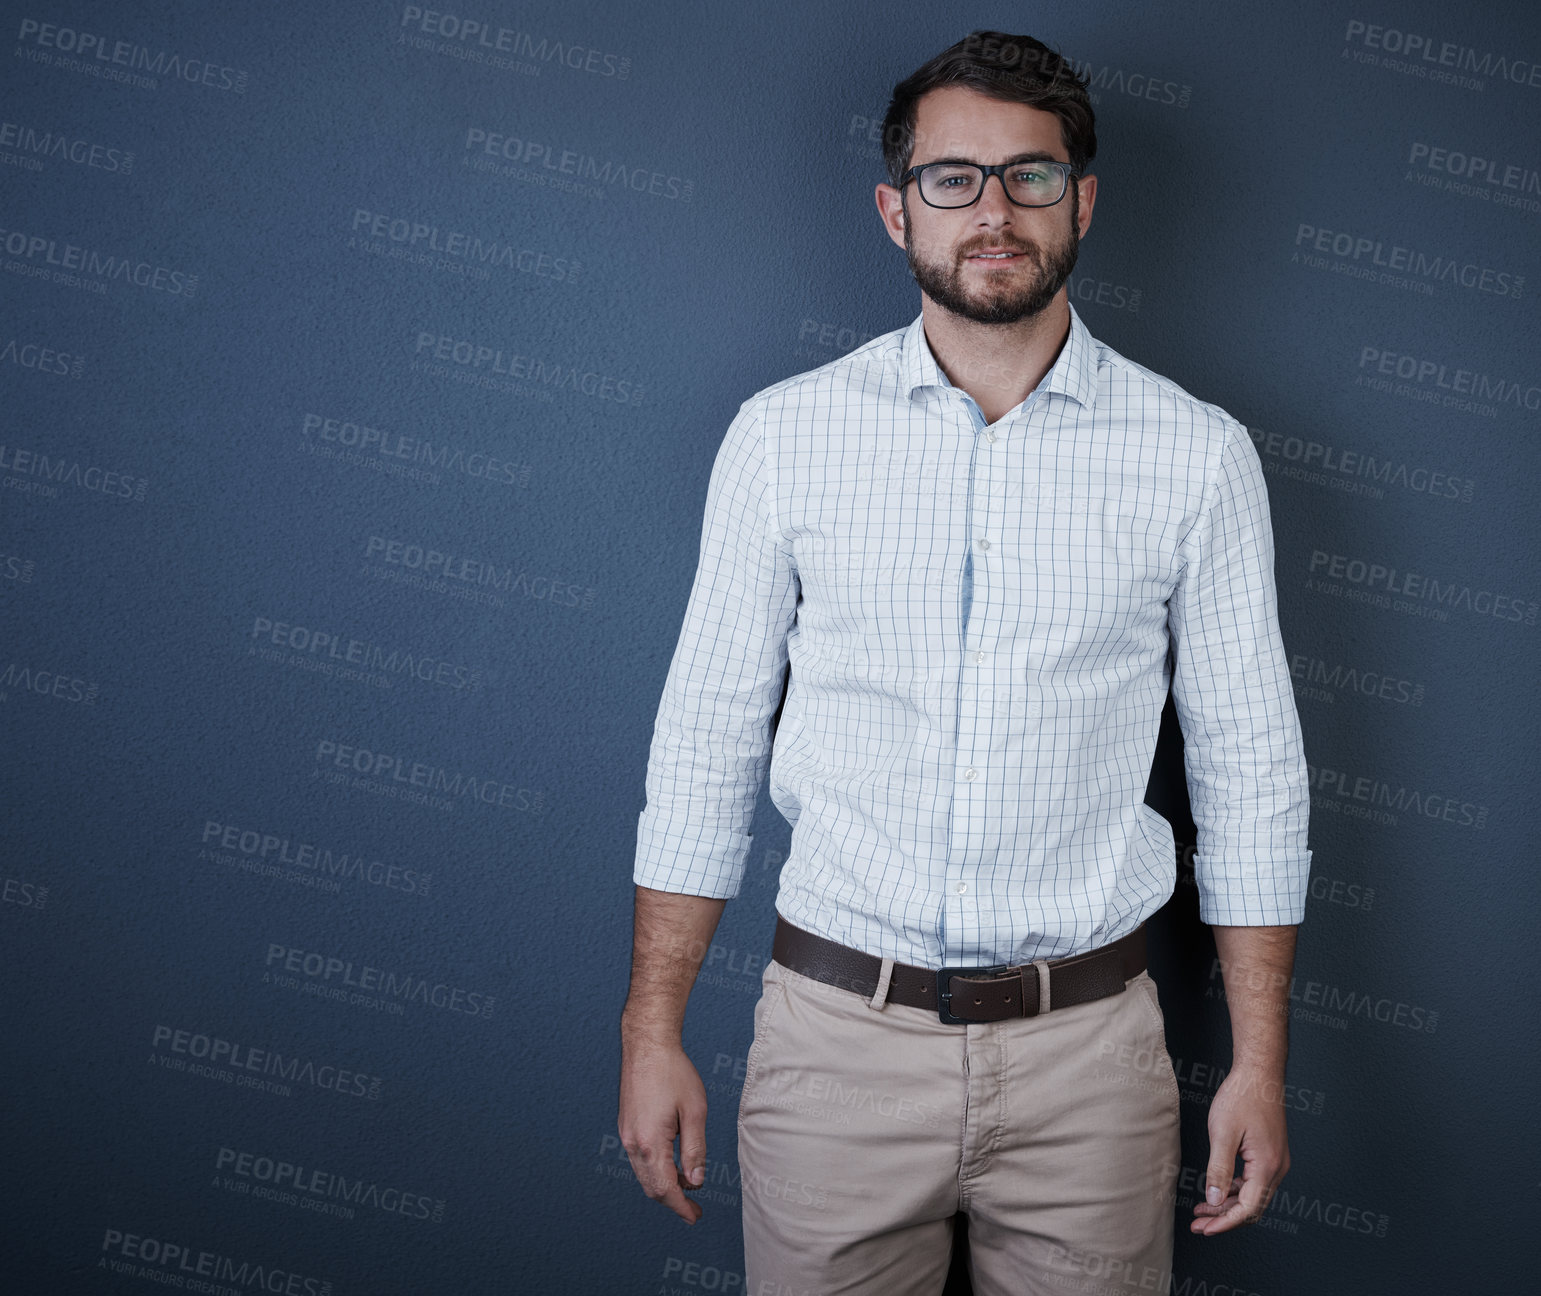 Buy stock photo Studio portrait of a handsome young businessman standing against a dark background